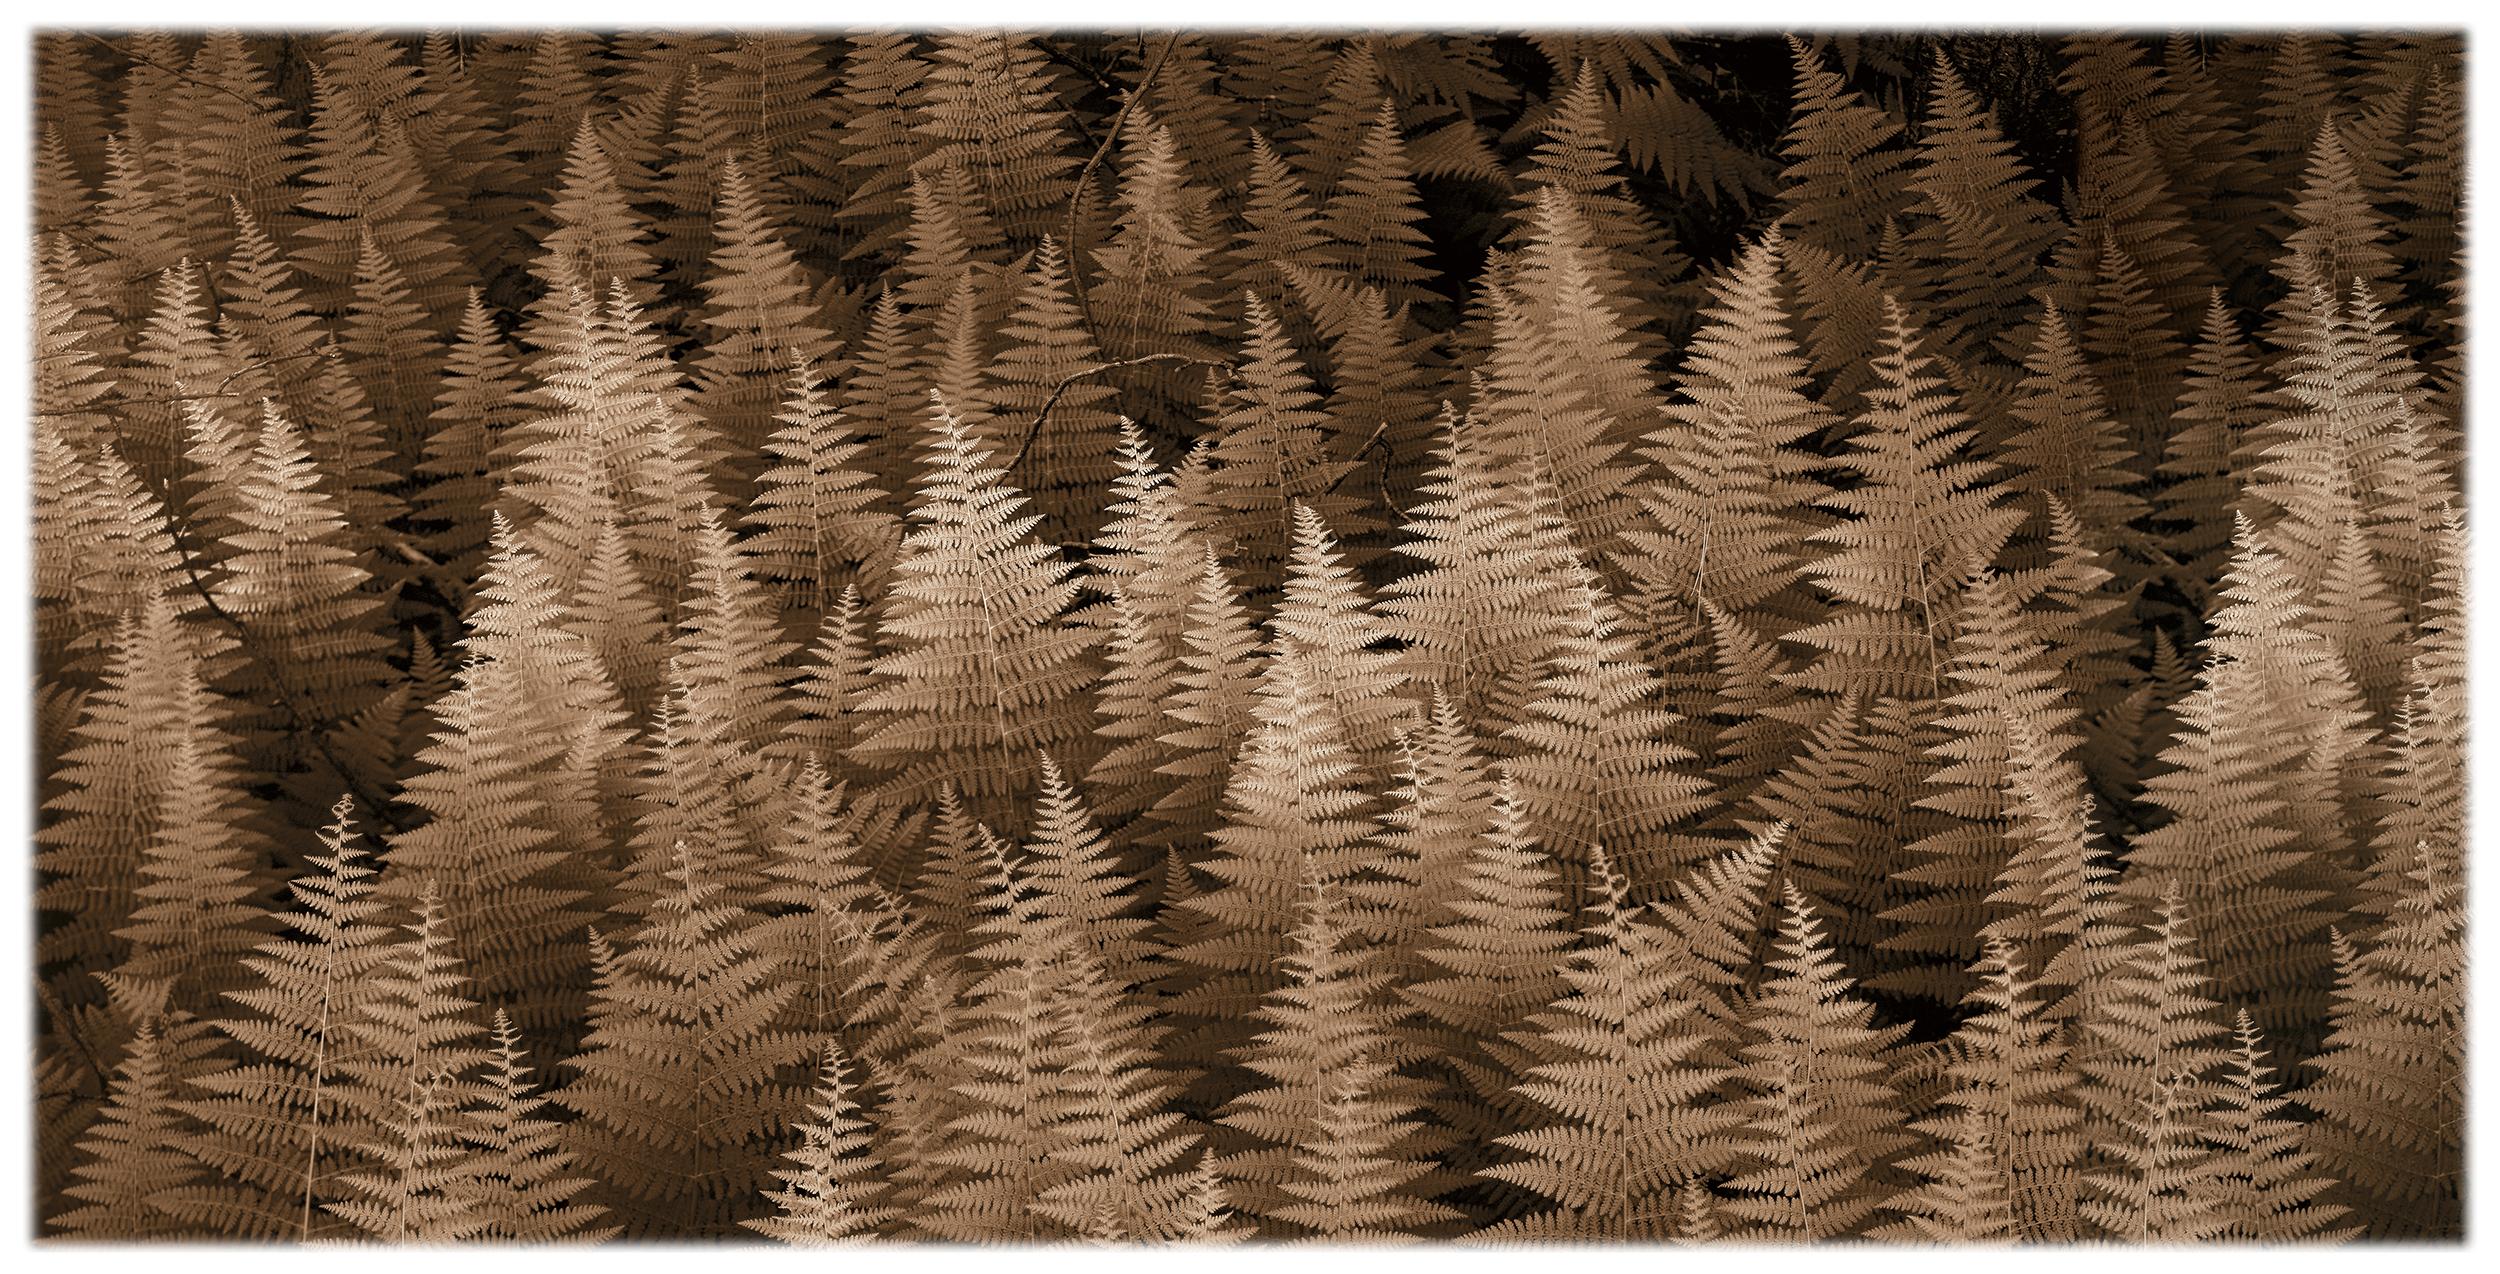 Sepia-tone still life photograph of a fern forest
pigment print on watercolor paper, signed and editioned
The photograph is unframed and made to order (print lead time is typically 2 weeks) and can ship, rolled in a tube, directly to your home or